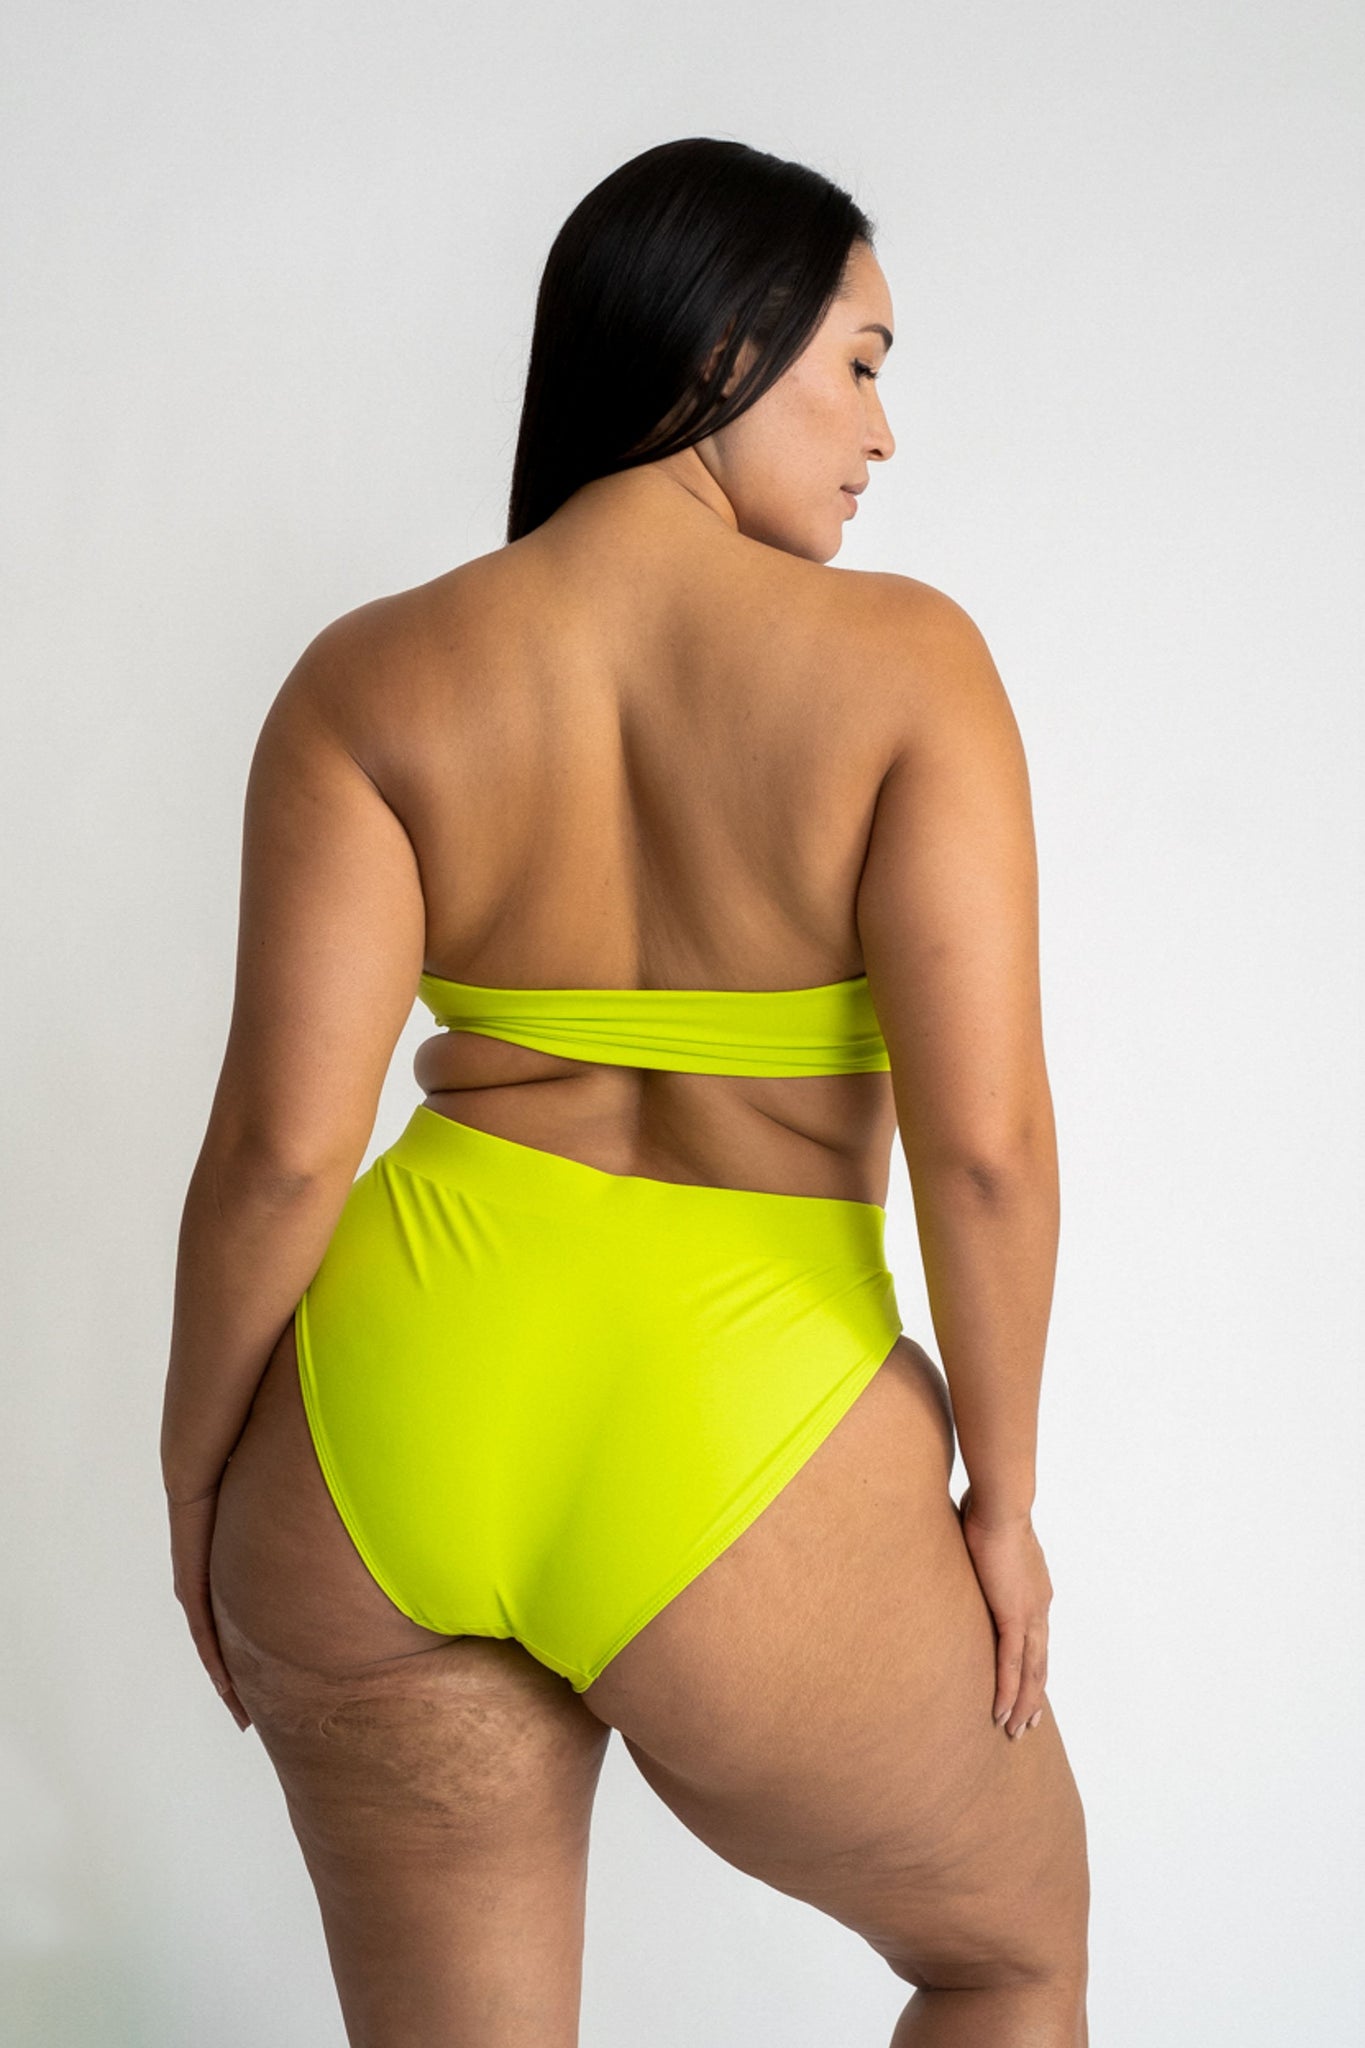 The back of a woman wearing bright neon green high waisted bikini bottoms with a matching bright neon green strapless bandeau bikini top.